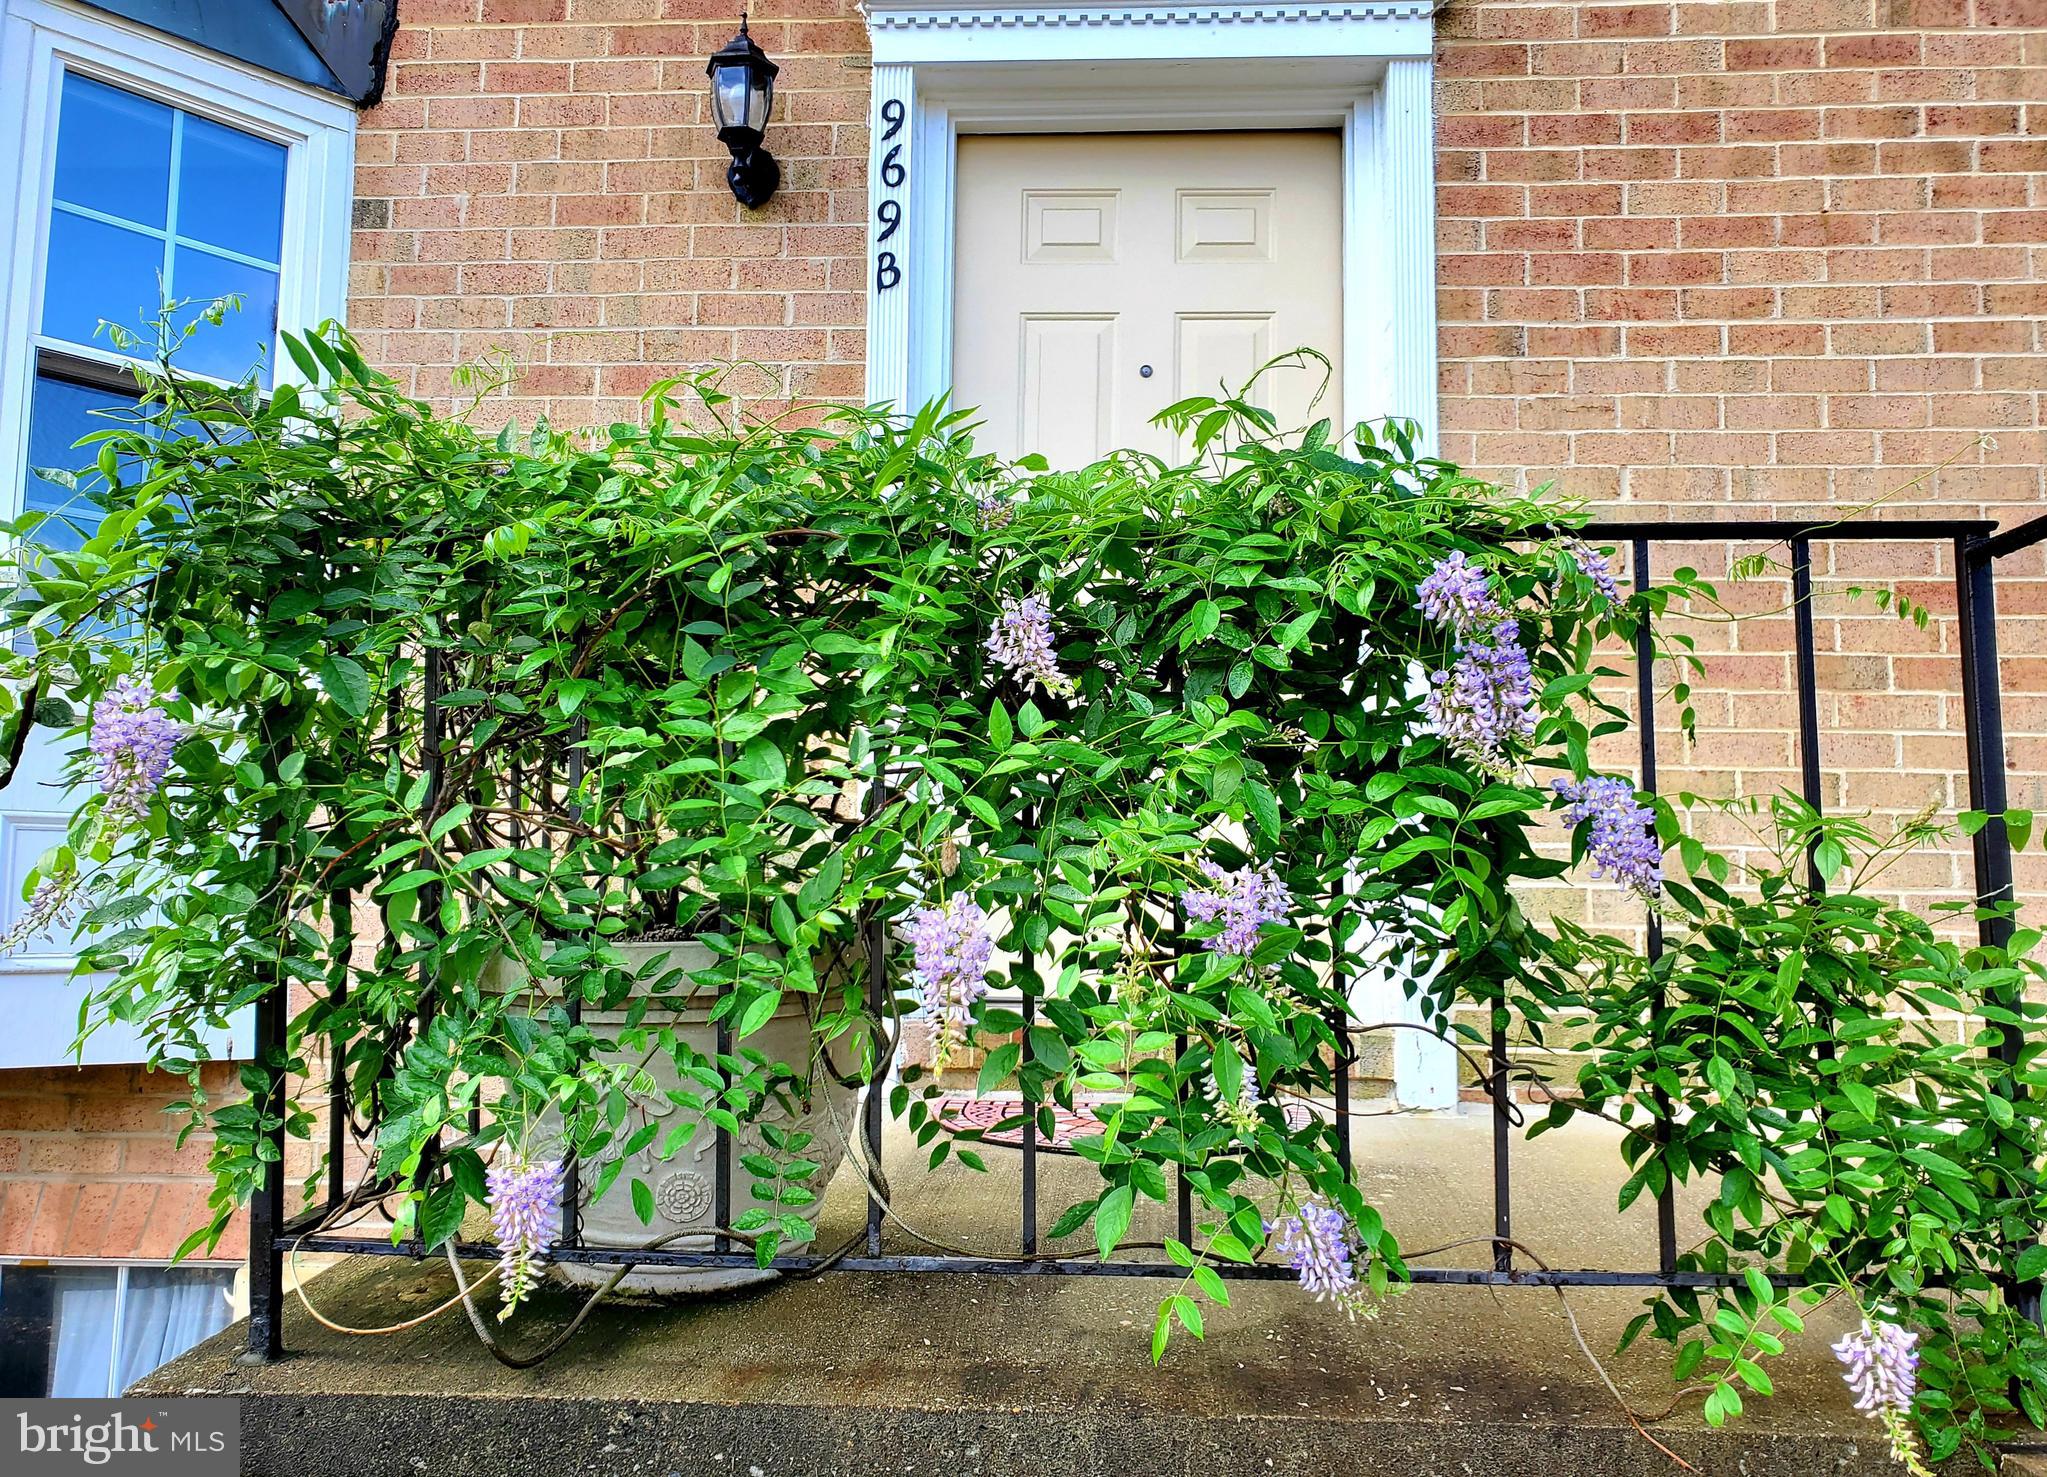 a couple of potted plants in front of door